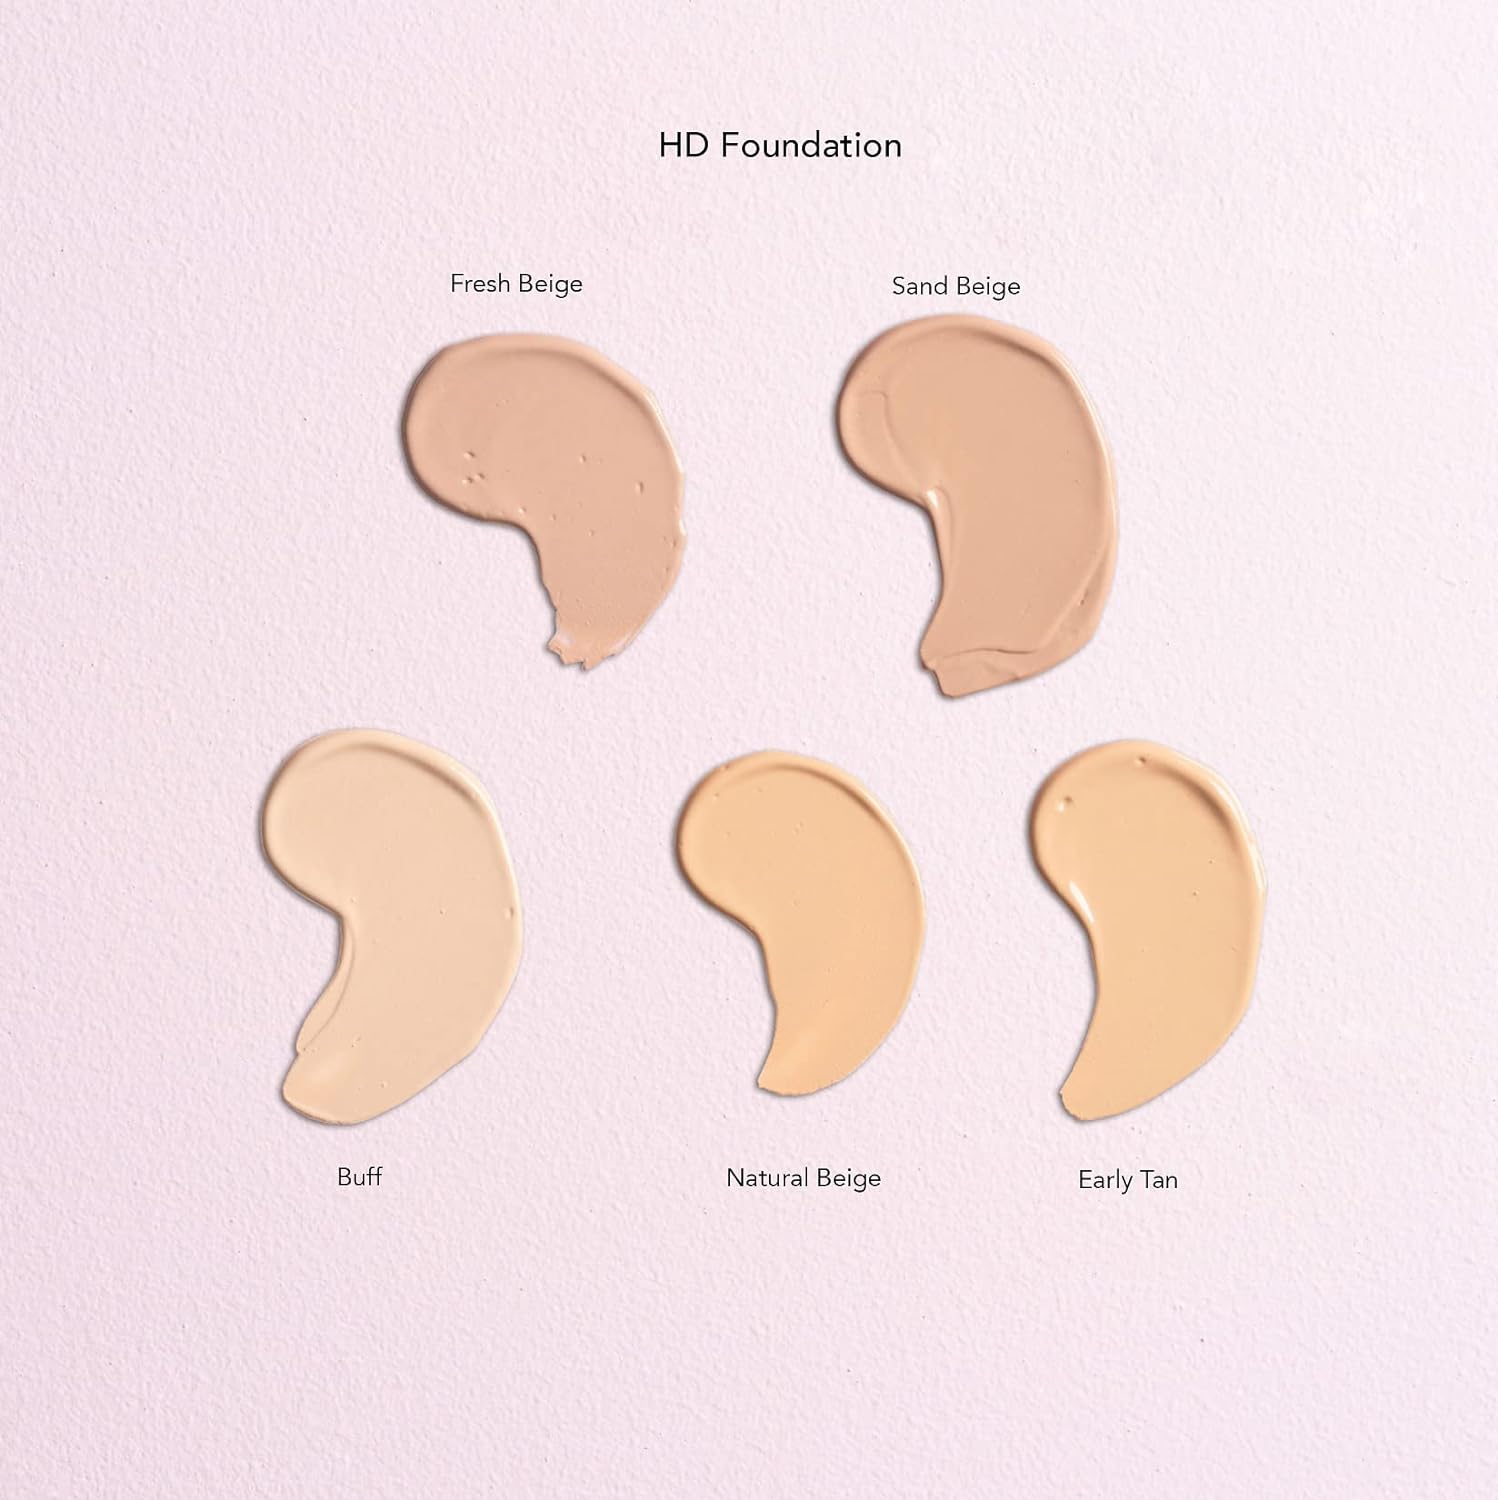 W7 | HD Foundation | Rich and Creamy Matte Formula | Medium Lasting Coverage | Available in 20 Shades | Natural Beige | Cruelty Free, Vegan Liquid Foundation Makeup by W7 Cosmetics : Beauty & Personal Care